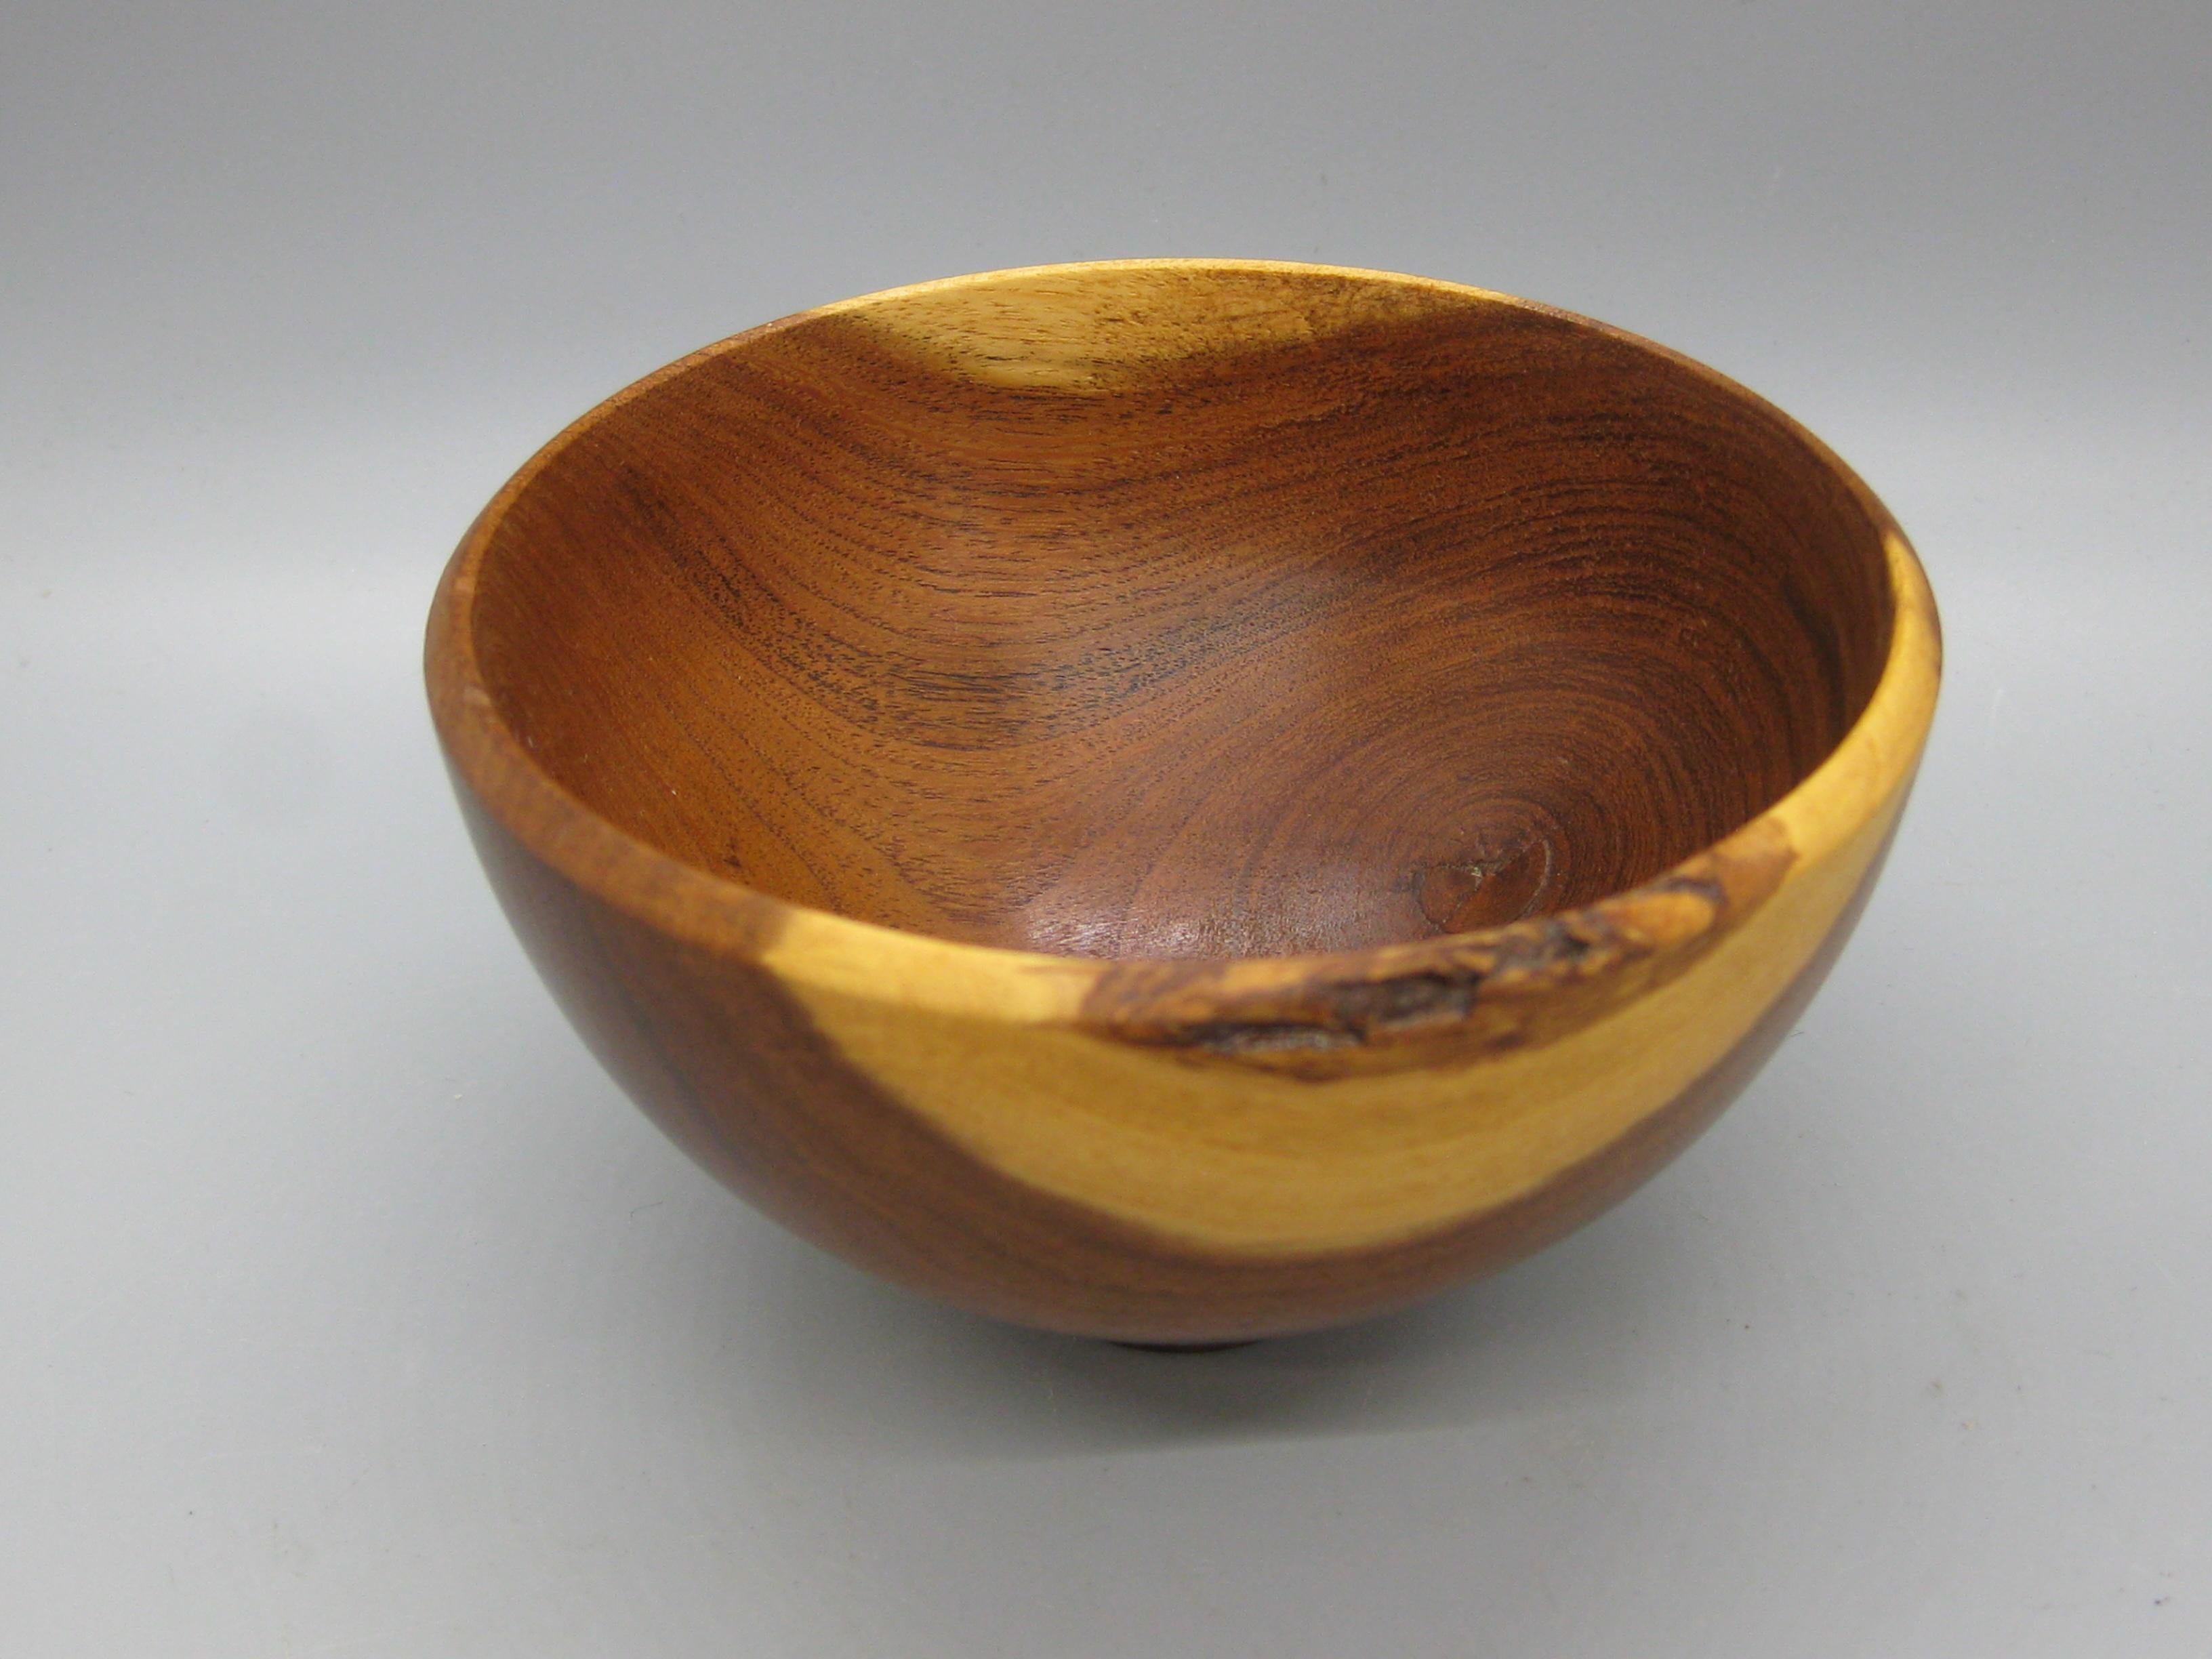 Expertly crafted Mesquite wood turned bowl by San Diego artist/craftsman Sally Ault. Signed on the underside. Wonderful shape and form. The natural wood grain pattern and color makes this bowl stand out. Has a natural freeform edge. In excellent